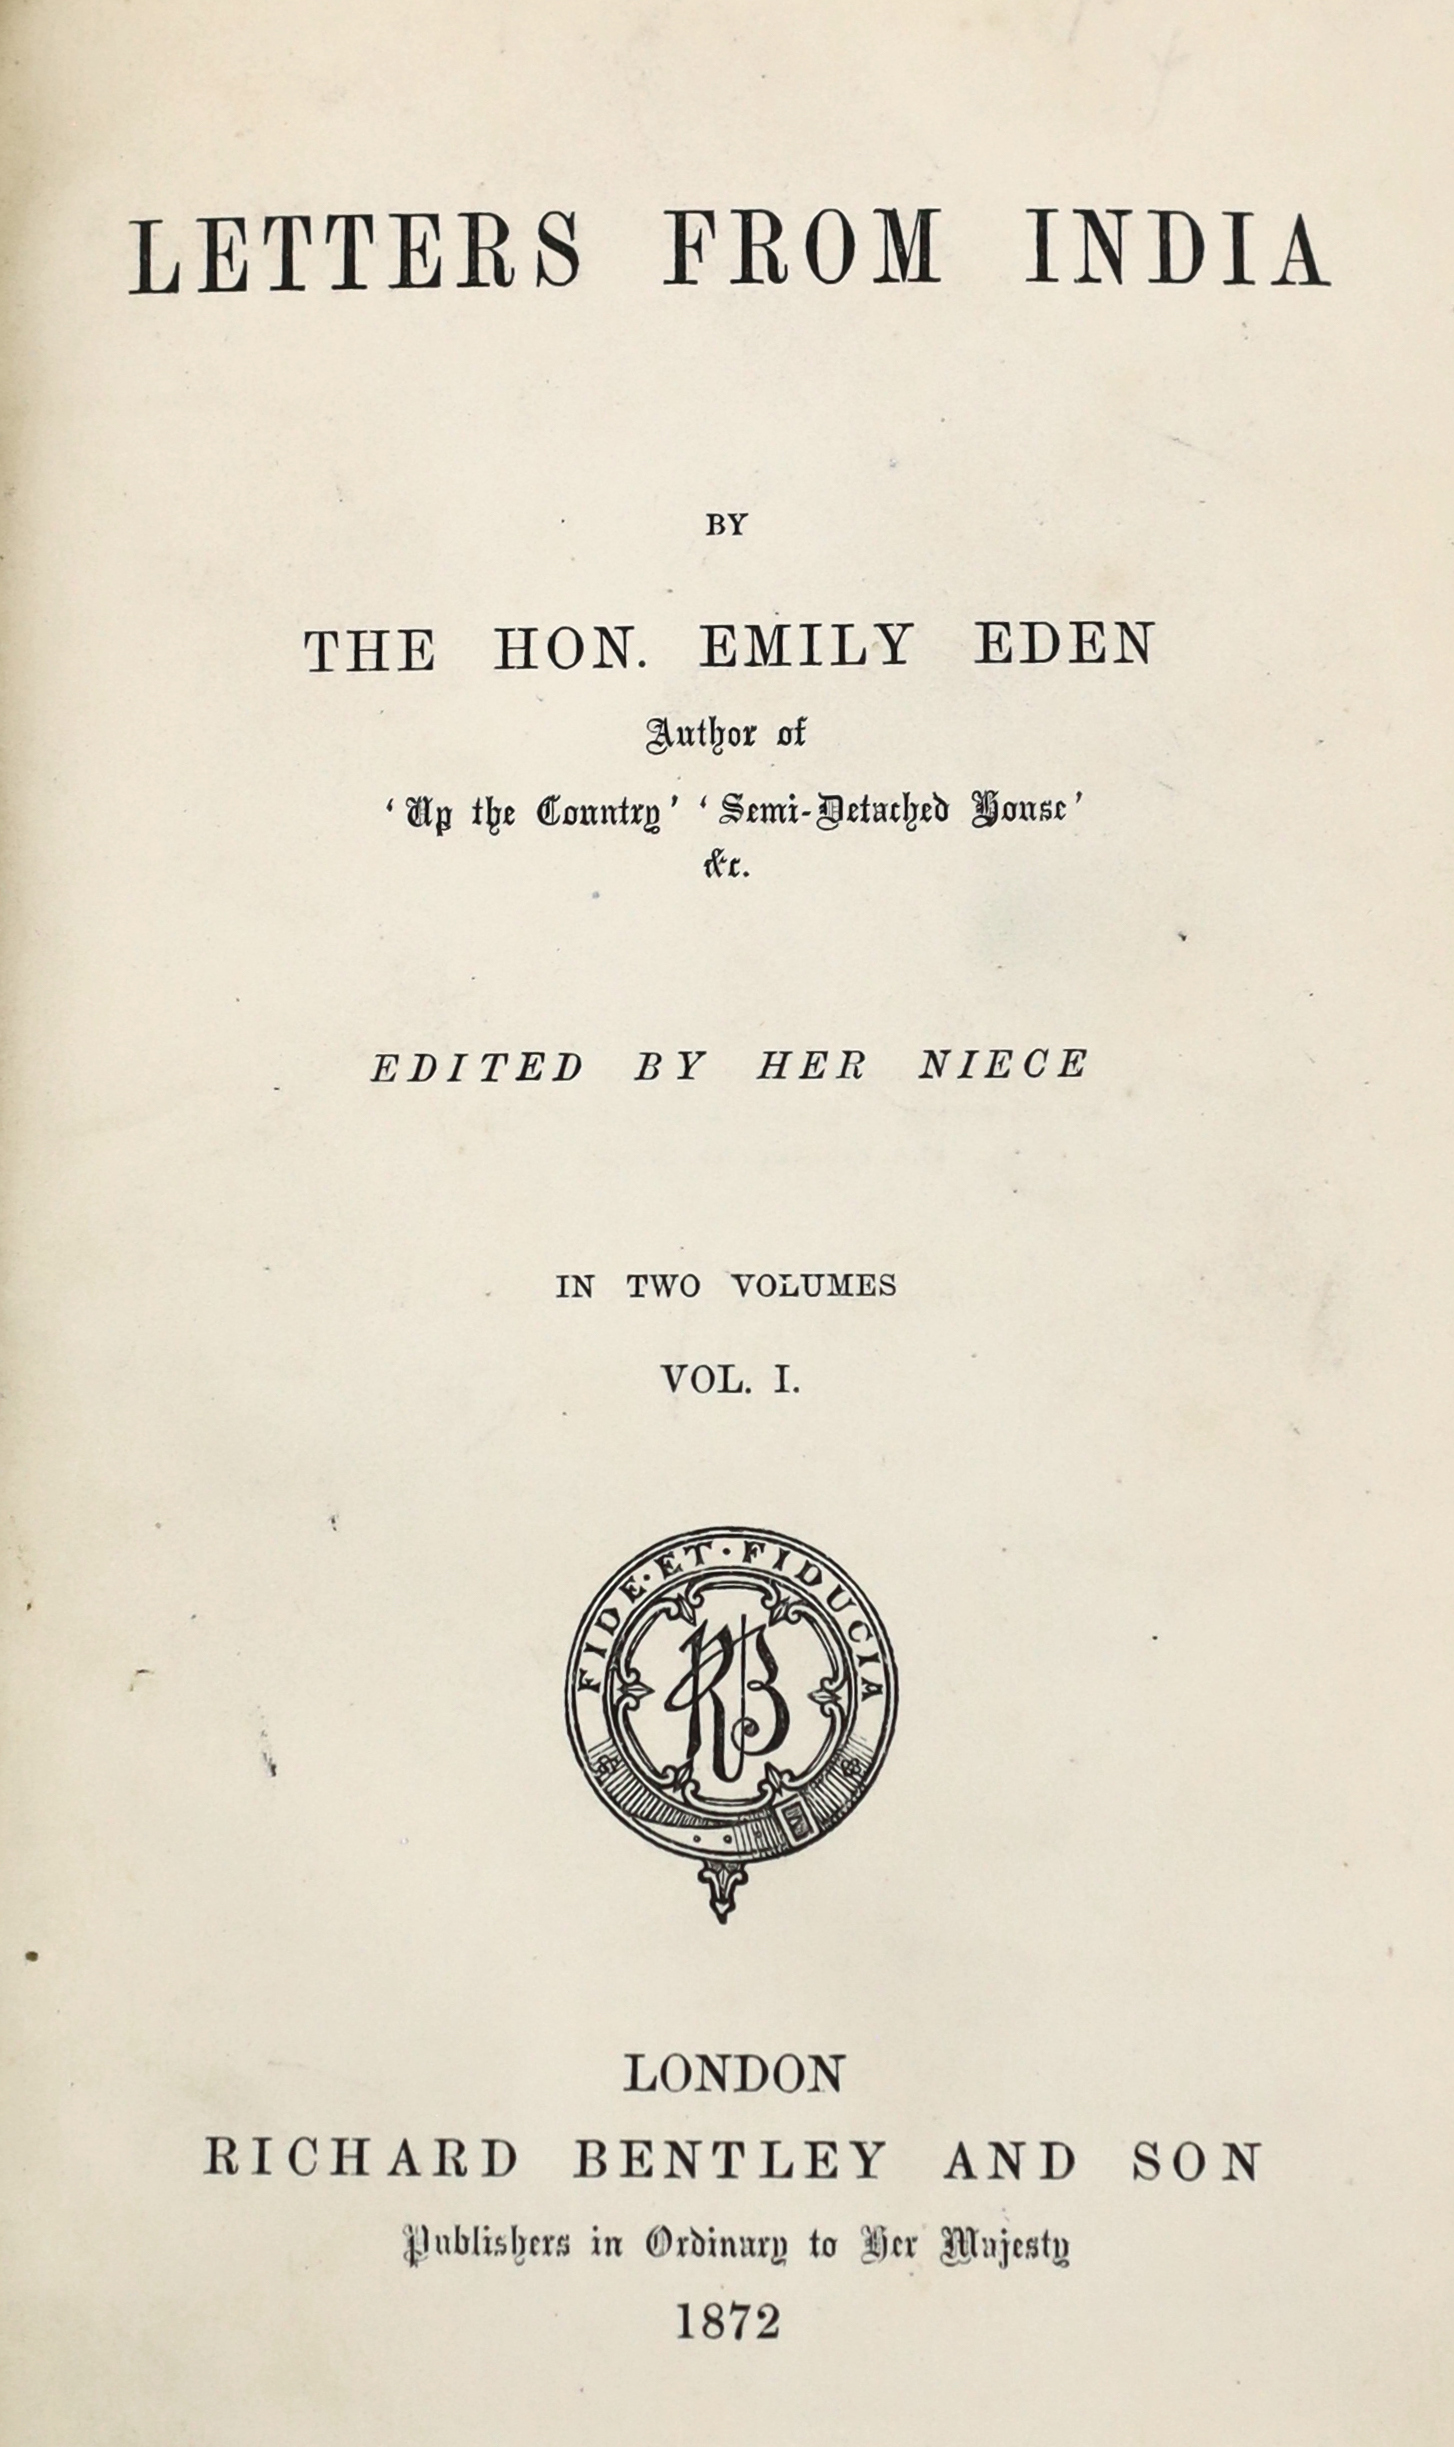 Eden, Emily - Letters from India, edited by her niece, 2 vols. 8vo                                                                                                                                                          